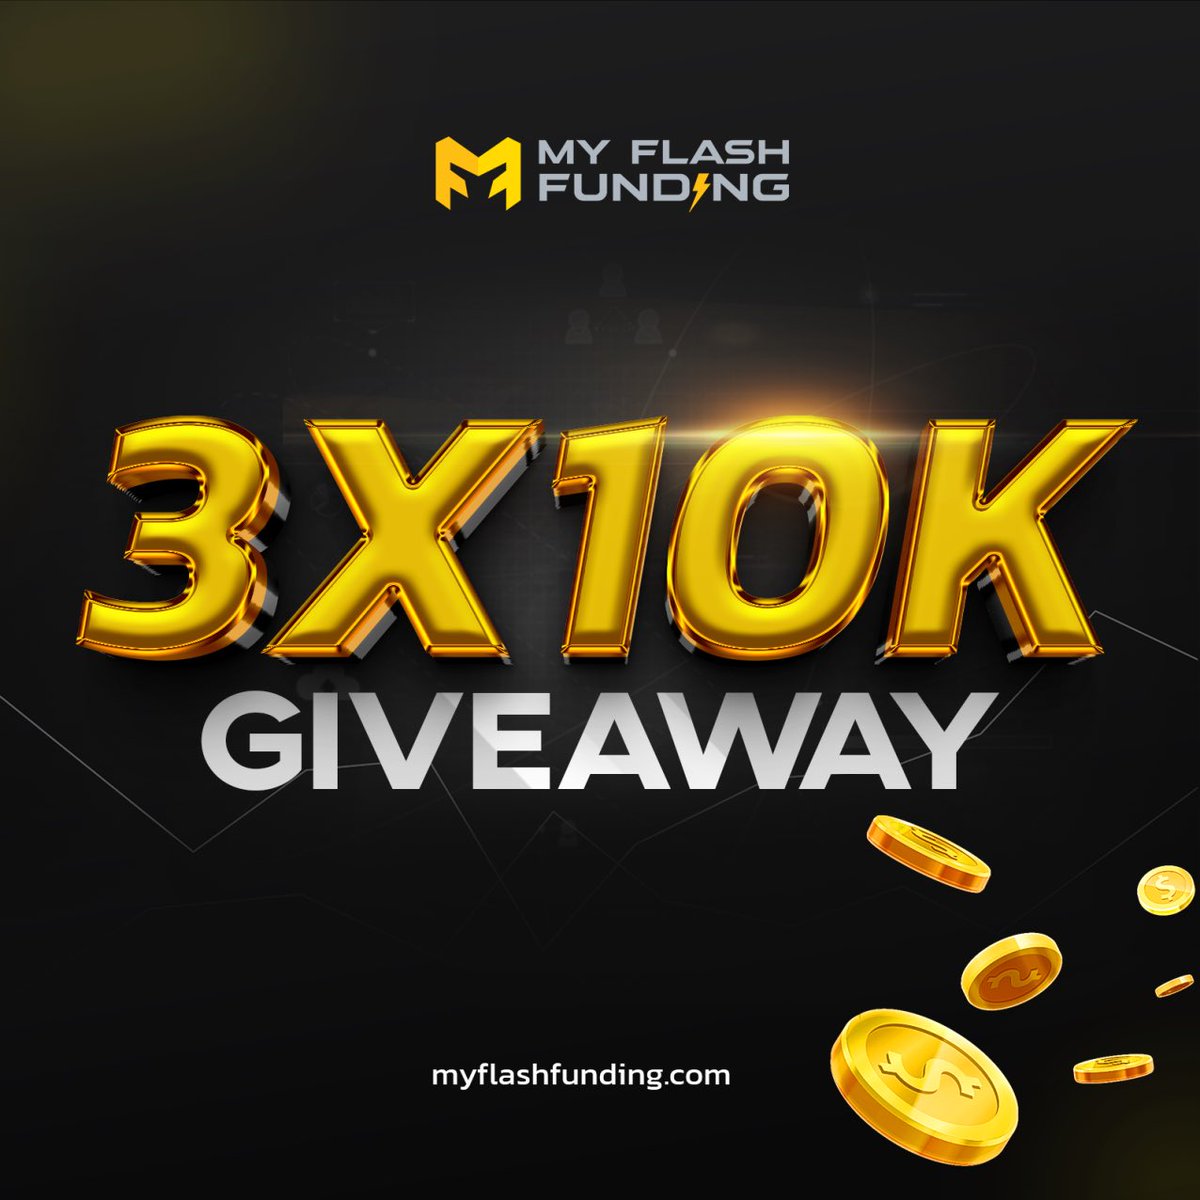 3x $10k challenge account giveaway⚡️

To participate;

Follow: @Timi_ICT | @myflashfunding | @blakemyff | @I_Am_LPT | @Temidire_right 

Follow: @TheToff_ | @SimonJunias32 | @afec_fx | @josh__ekwunife | @thisismogaji 

Like & Retweet this post and tag 4 of your trader's friends